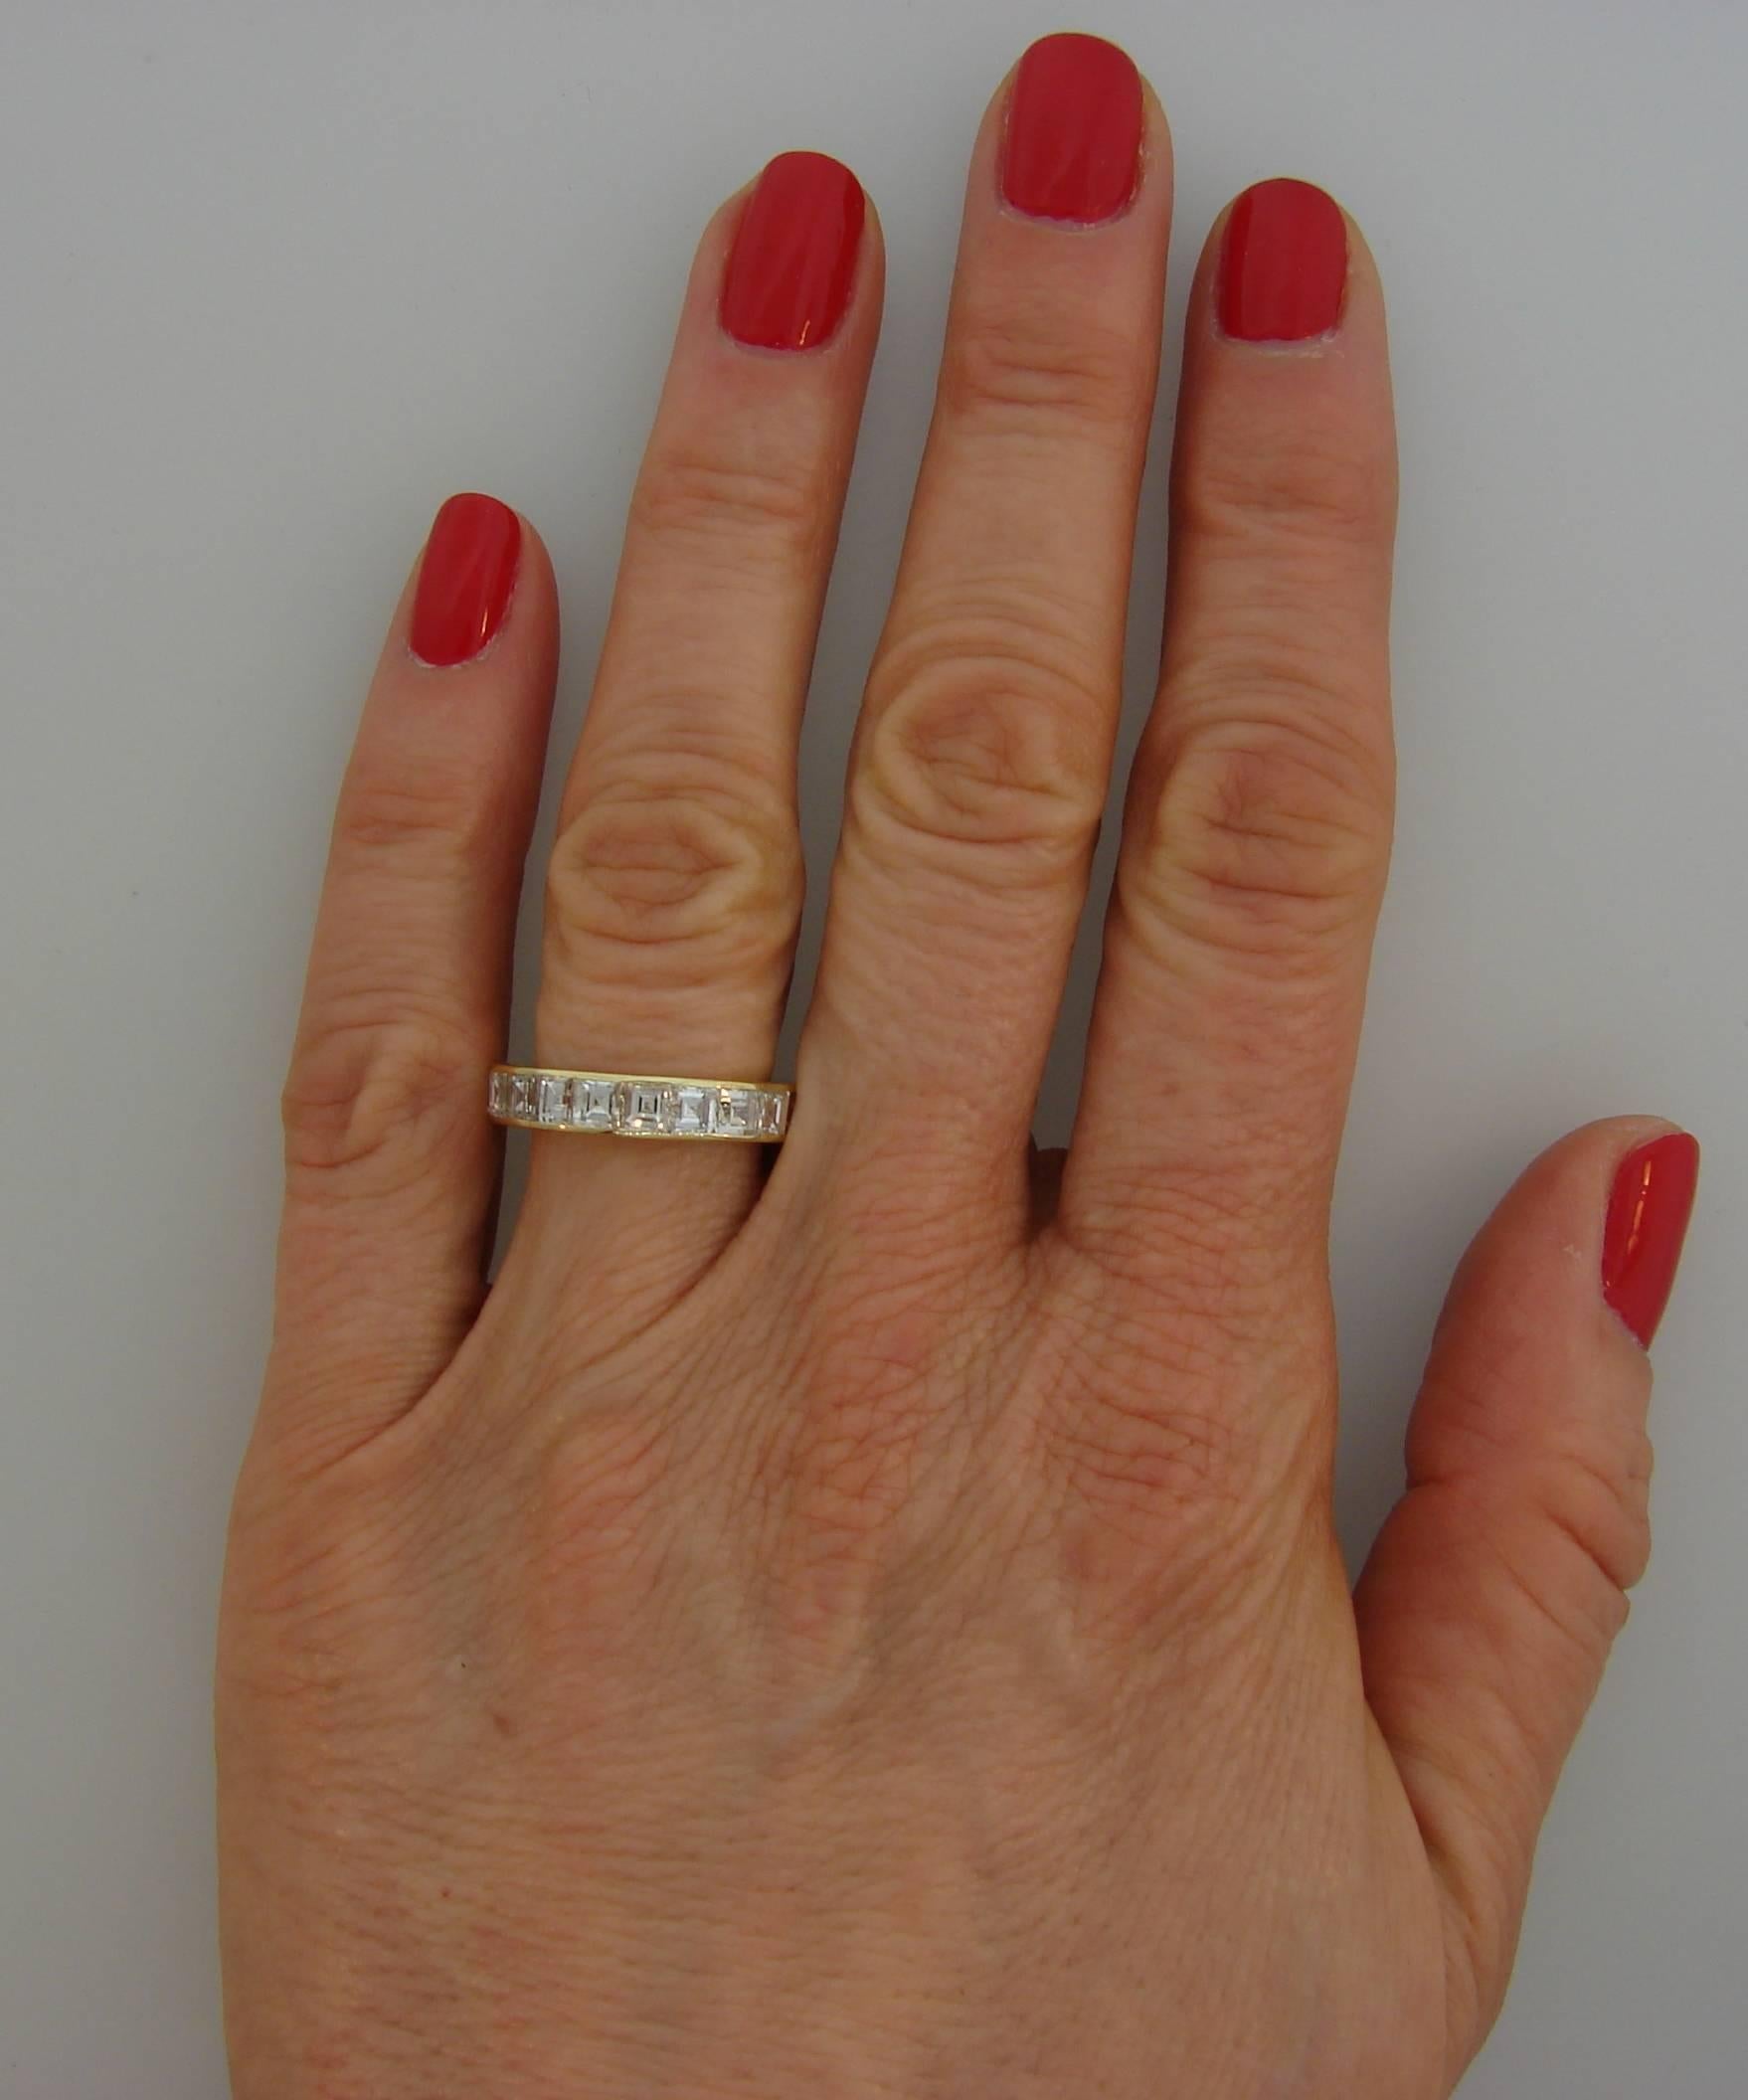 Classy and timeless eternity band created by Van Cleef & Arpels. 
It is made of 18 karat yellow gold and twenty one asscher cut diamonds (F color, VVS clarity, total weight approximately 4.20 carats). 
The band is size 6.75-7. It is 4.2 mm wide and